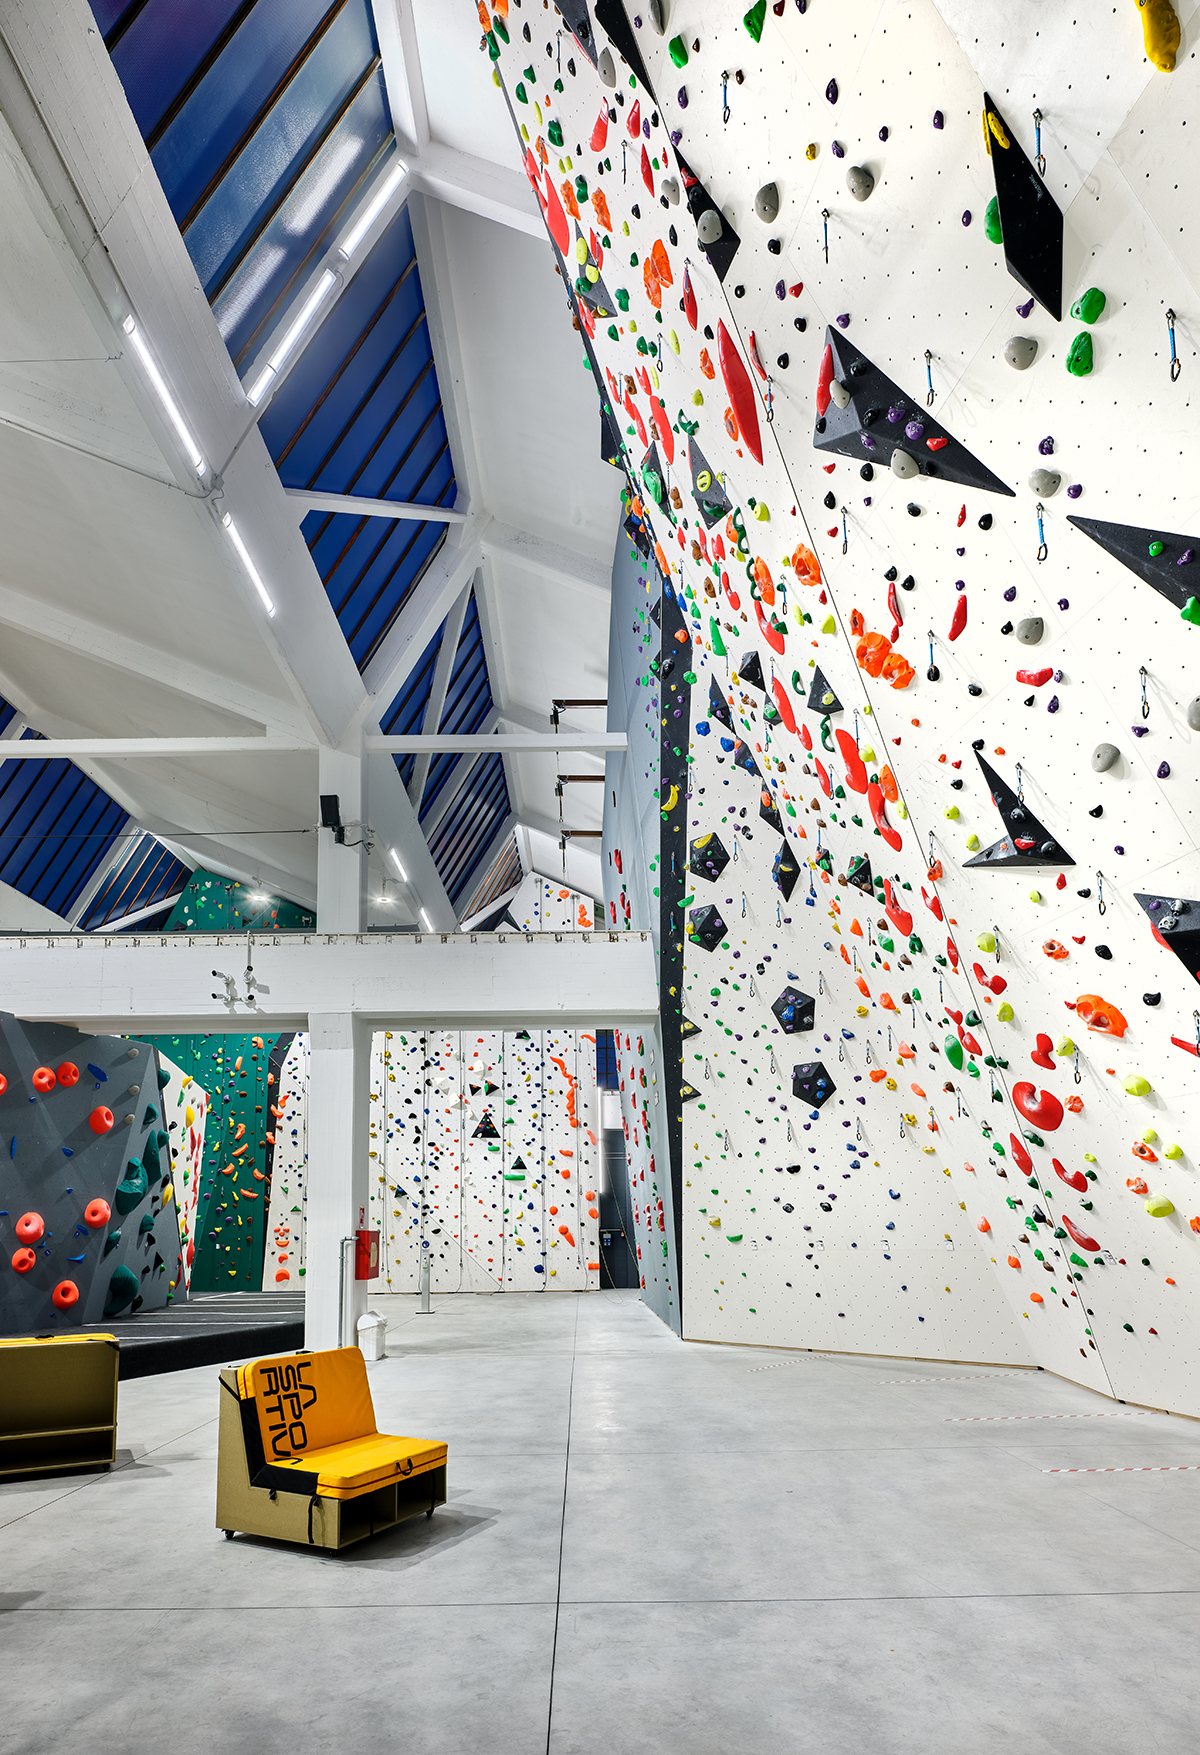 Installation sportive indoor Orobia Climbing